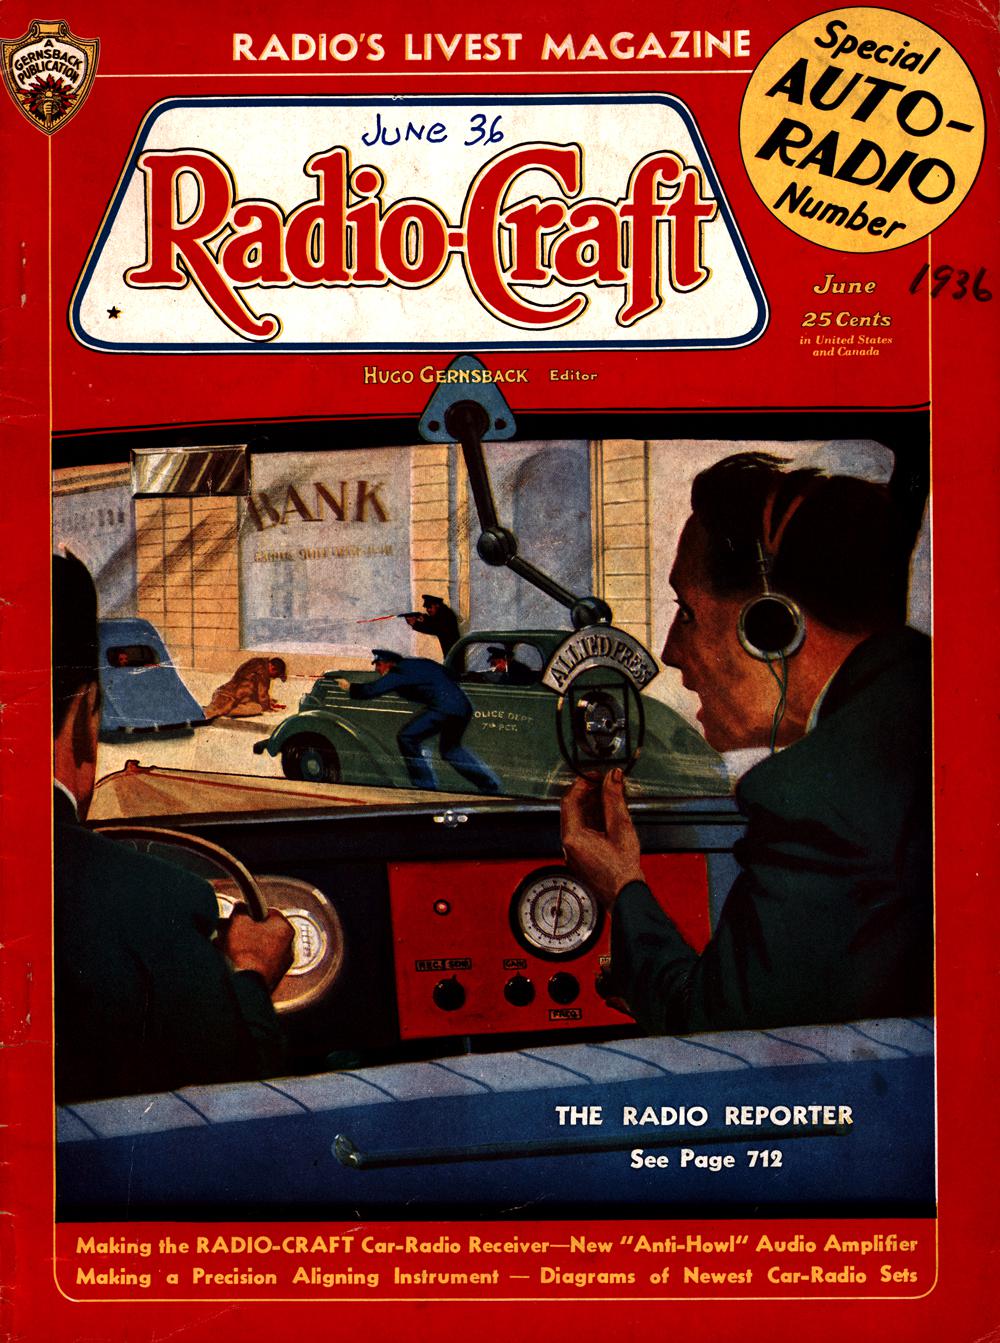 1936 - Radio-craft. and popular electronics; radio-electronics in all its phases - Vol. 7, No. 12